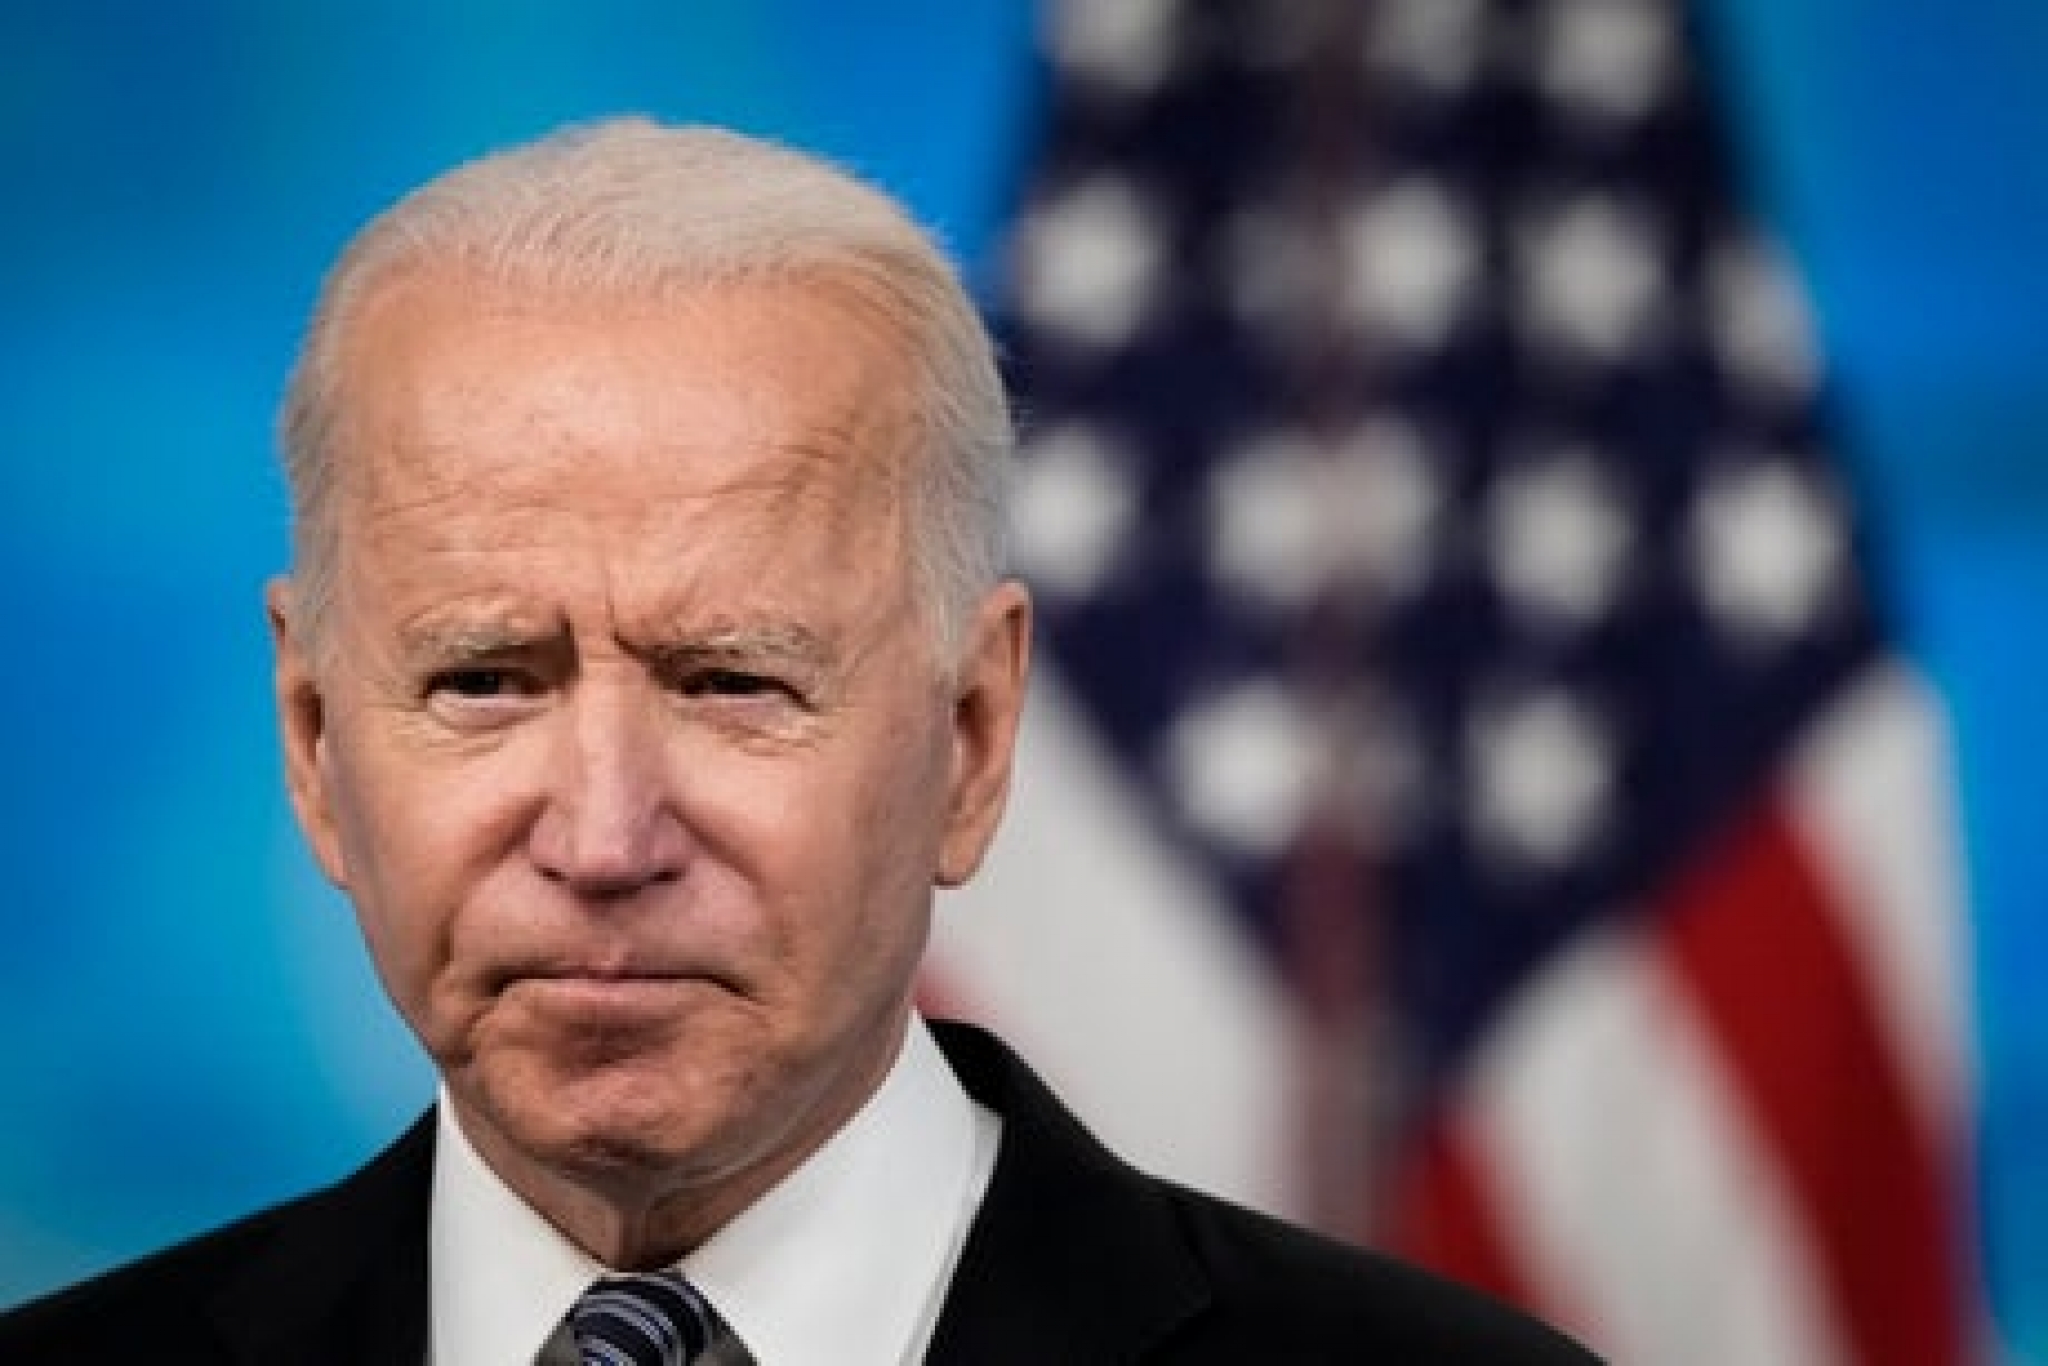 Joe Biden chokes up when asked how son Beau would judge first 100 days of presidency: ‘He should be sitting in this chair’